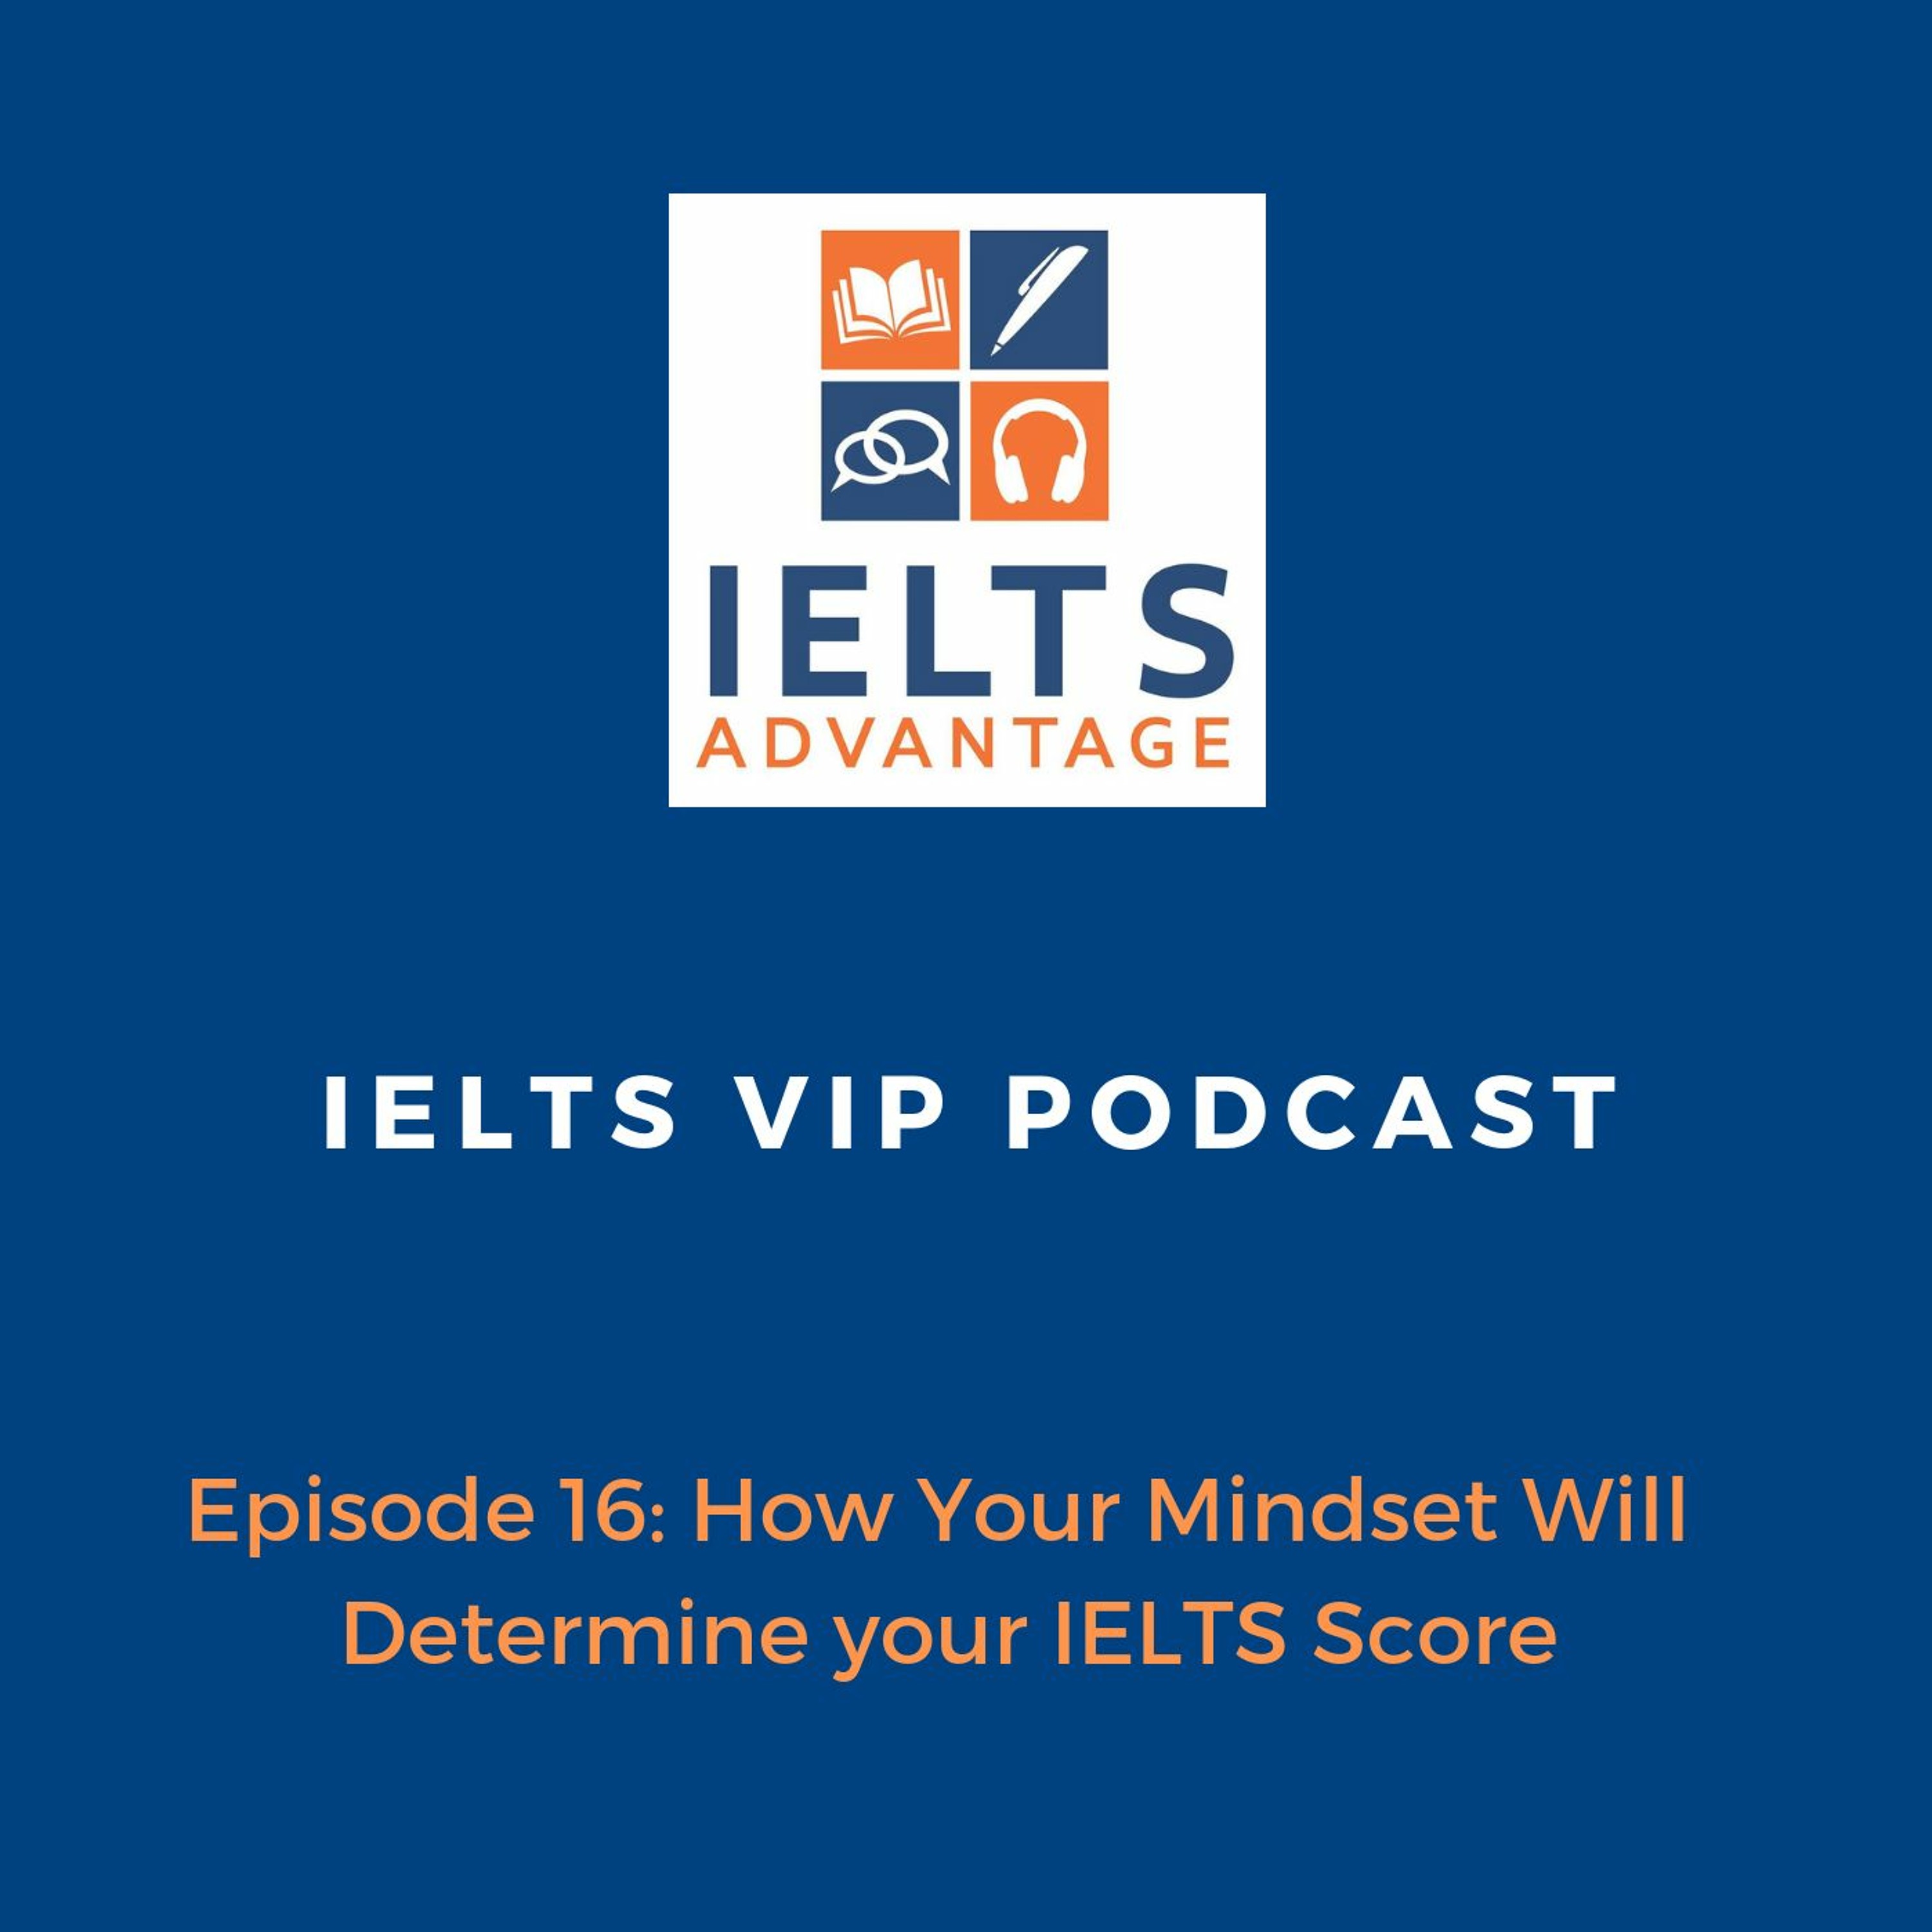 Episode 16: How Your Mindset Will Determine your IELTS Score